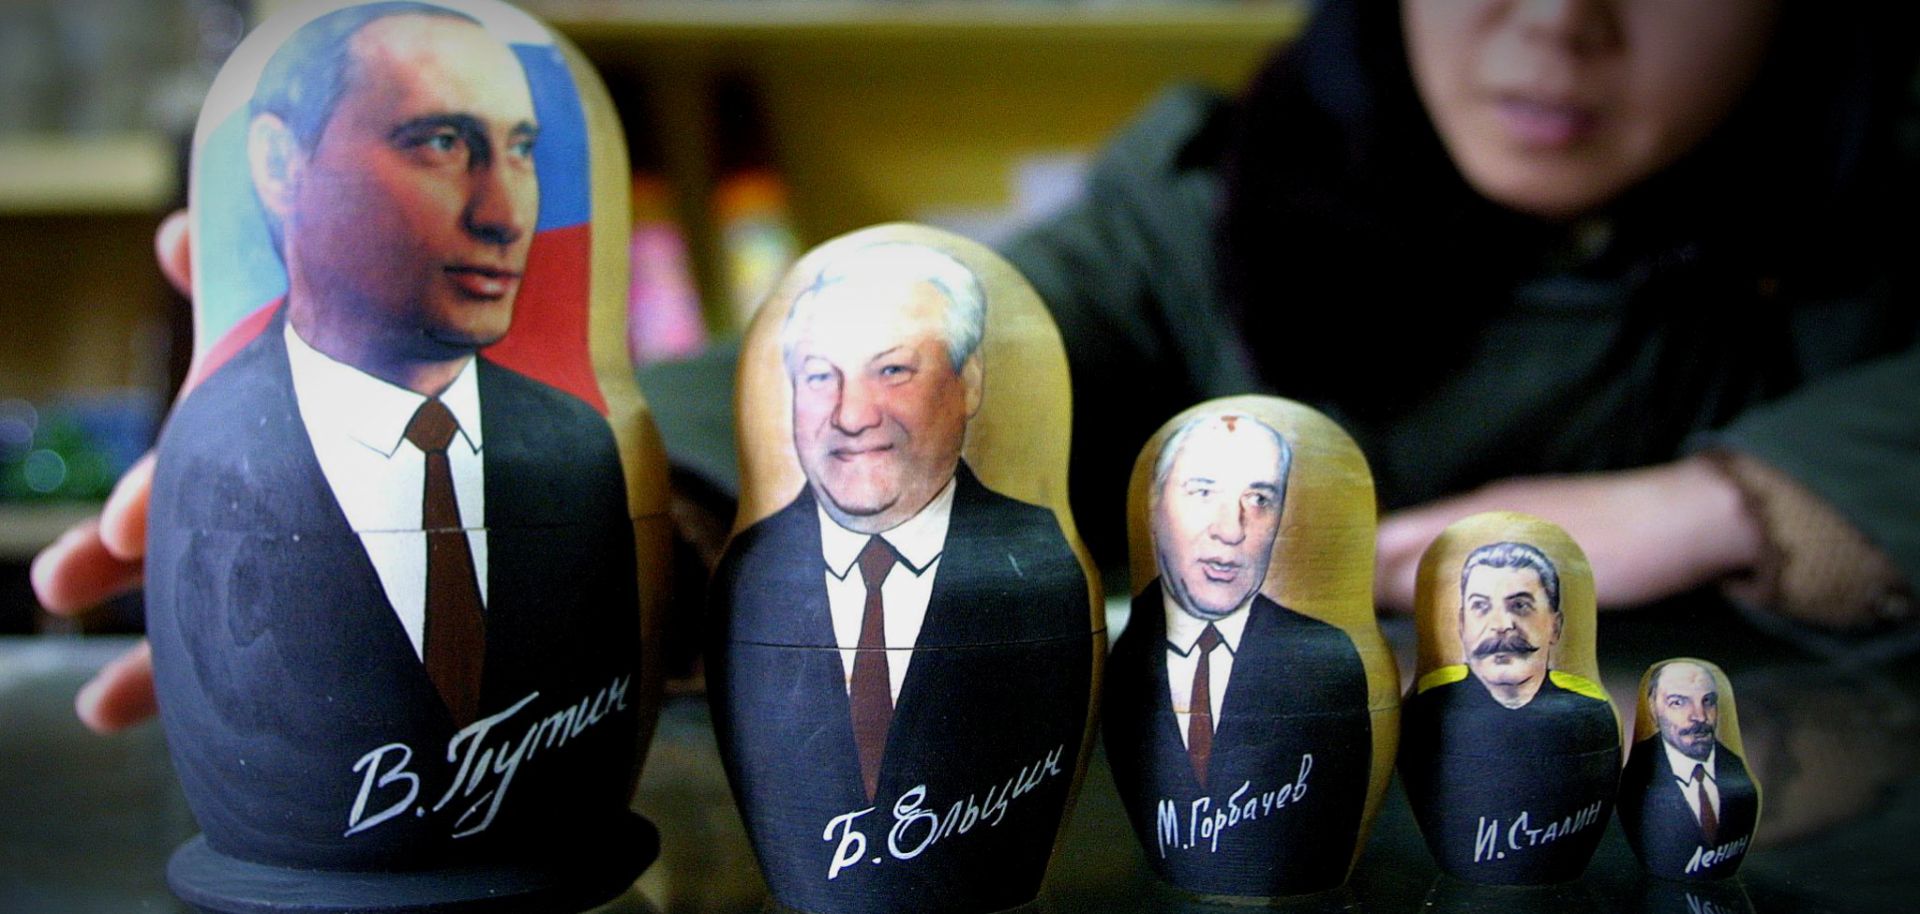 Russian President Vladimir Putin is the largest in a lineup of matryoshki, or nesting dolls, depicting Russian leaders past and present.